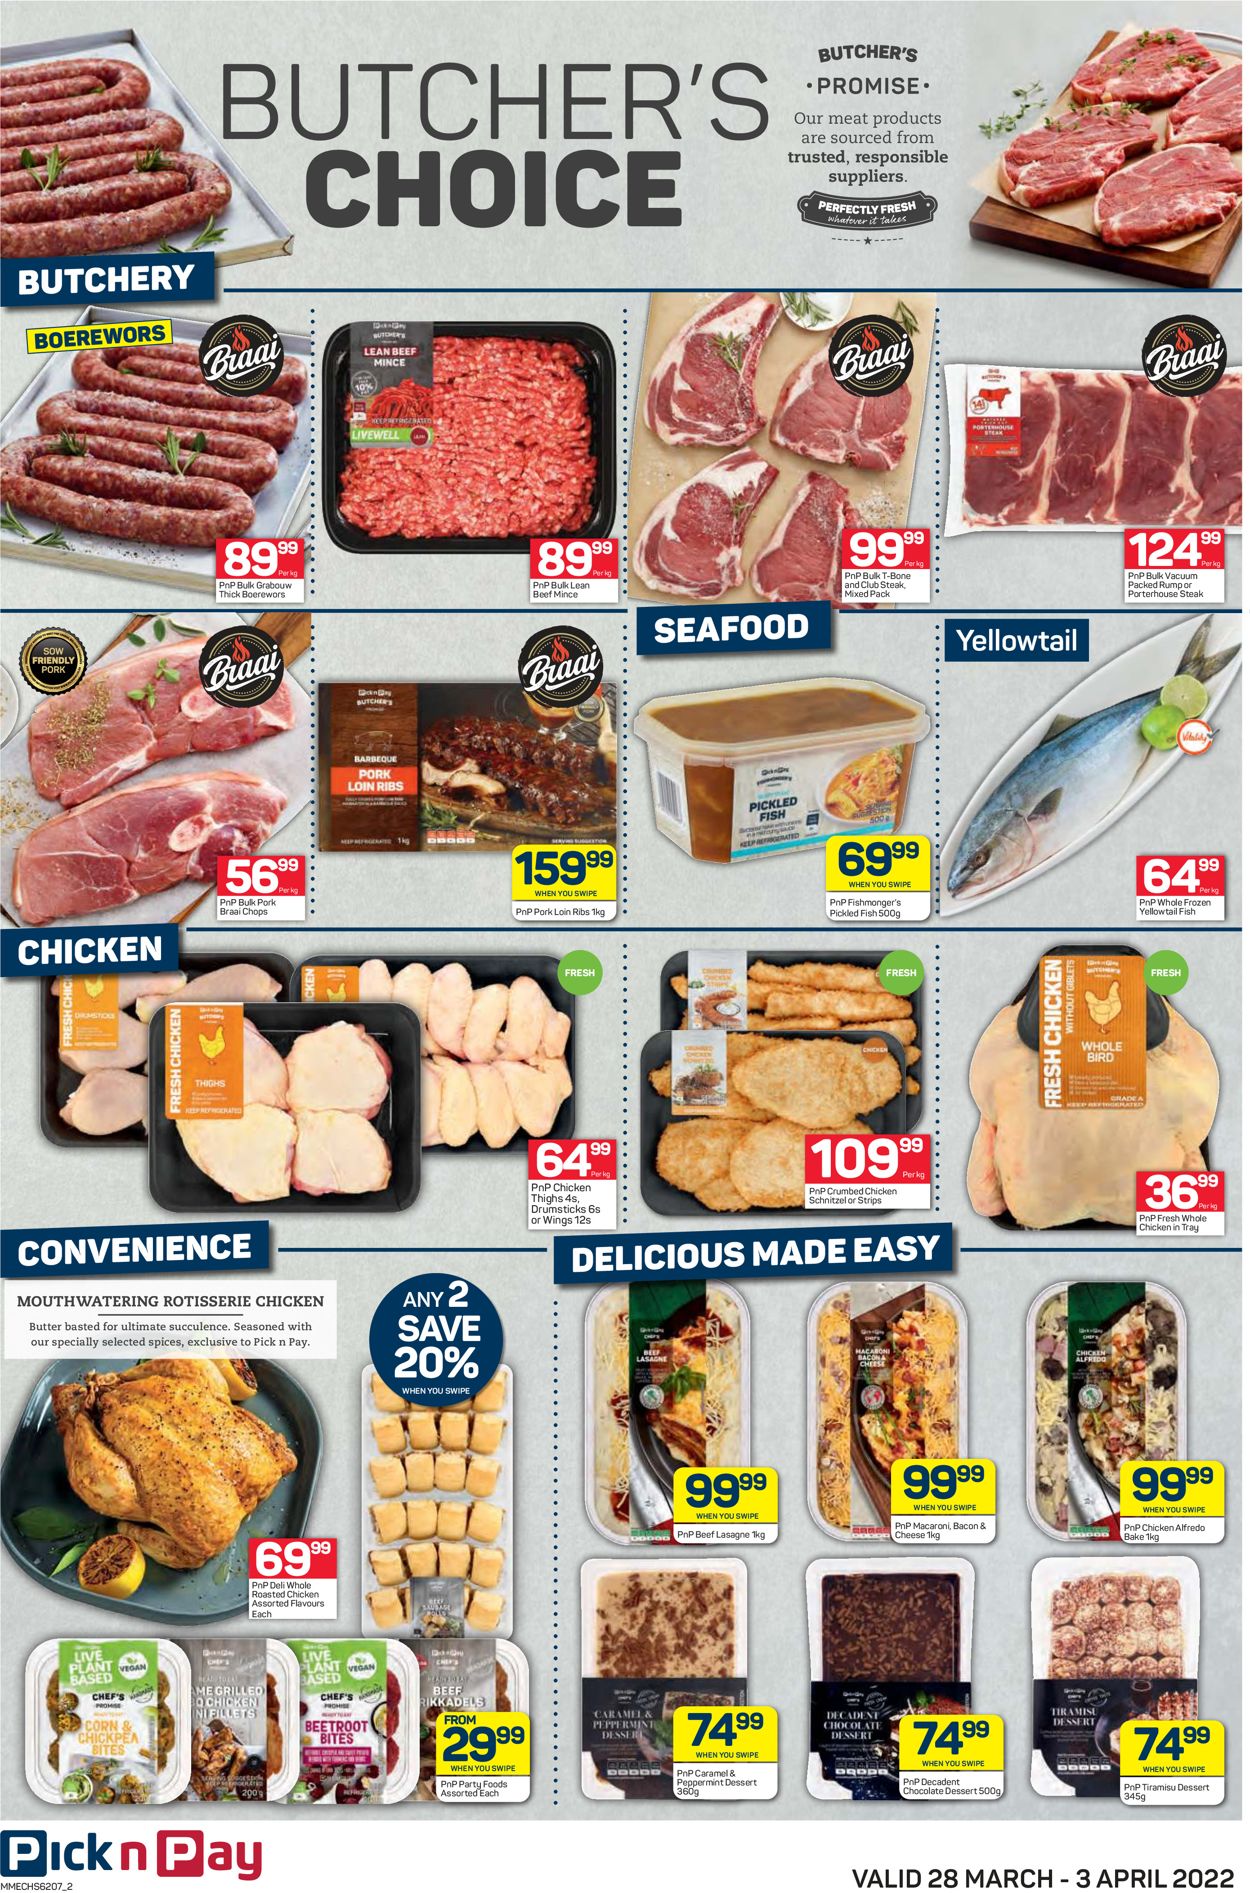 Pick n Pay Catalogue - 2022/03/28-2022/04/03 (Page 2)